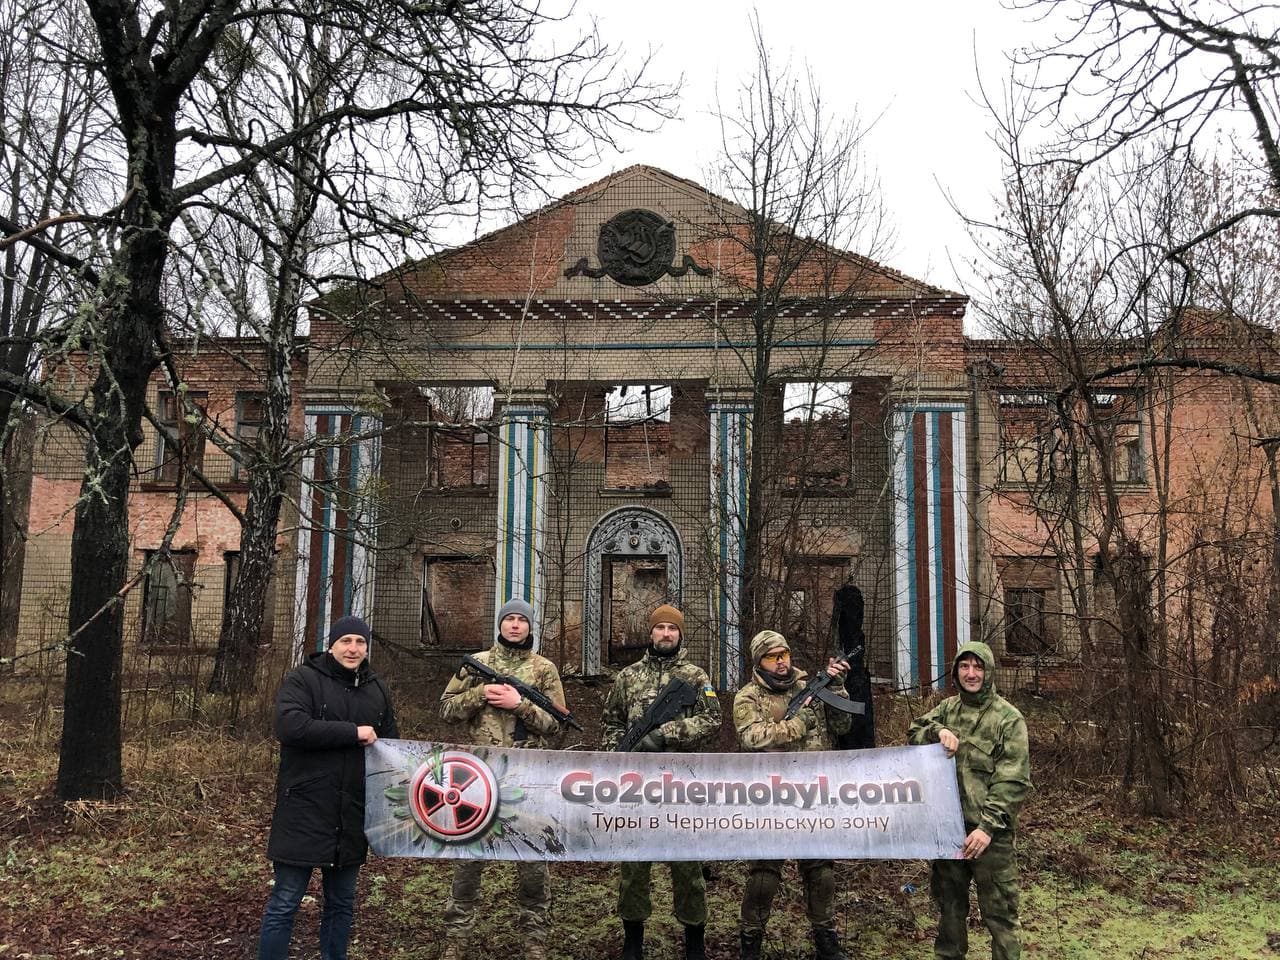 Airsoft events in the Chernobyl exclusion zone - photo 2